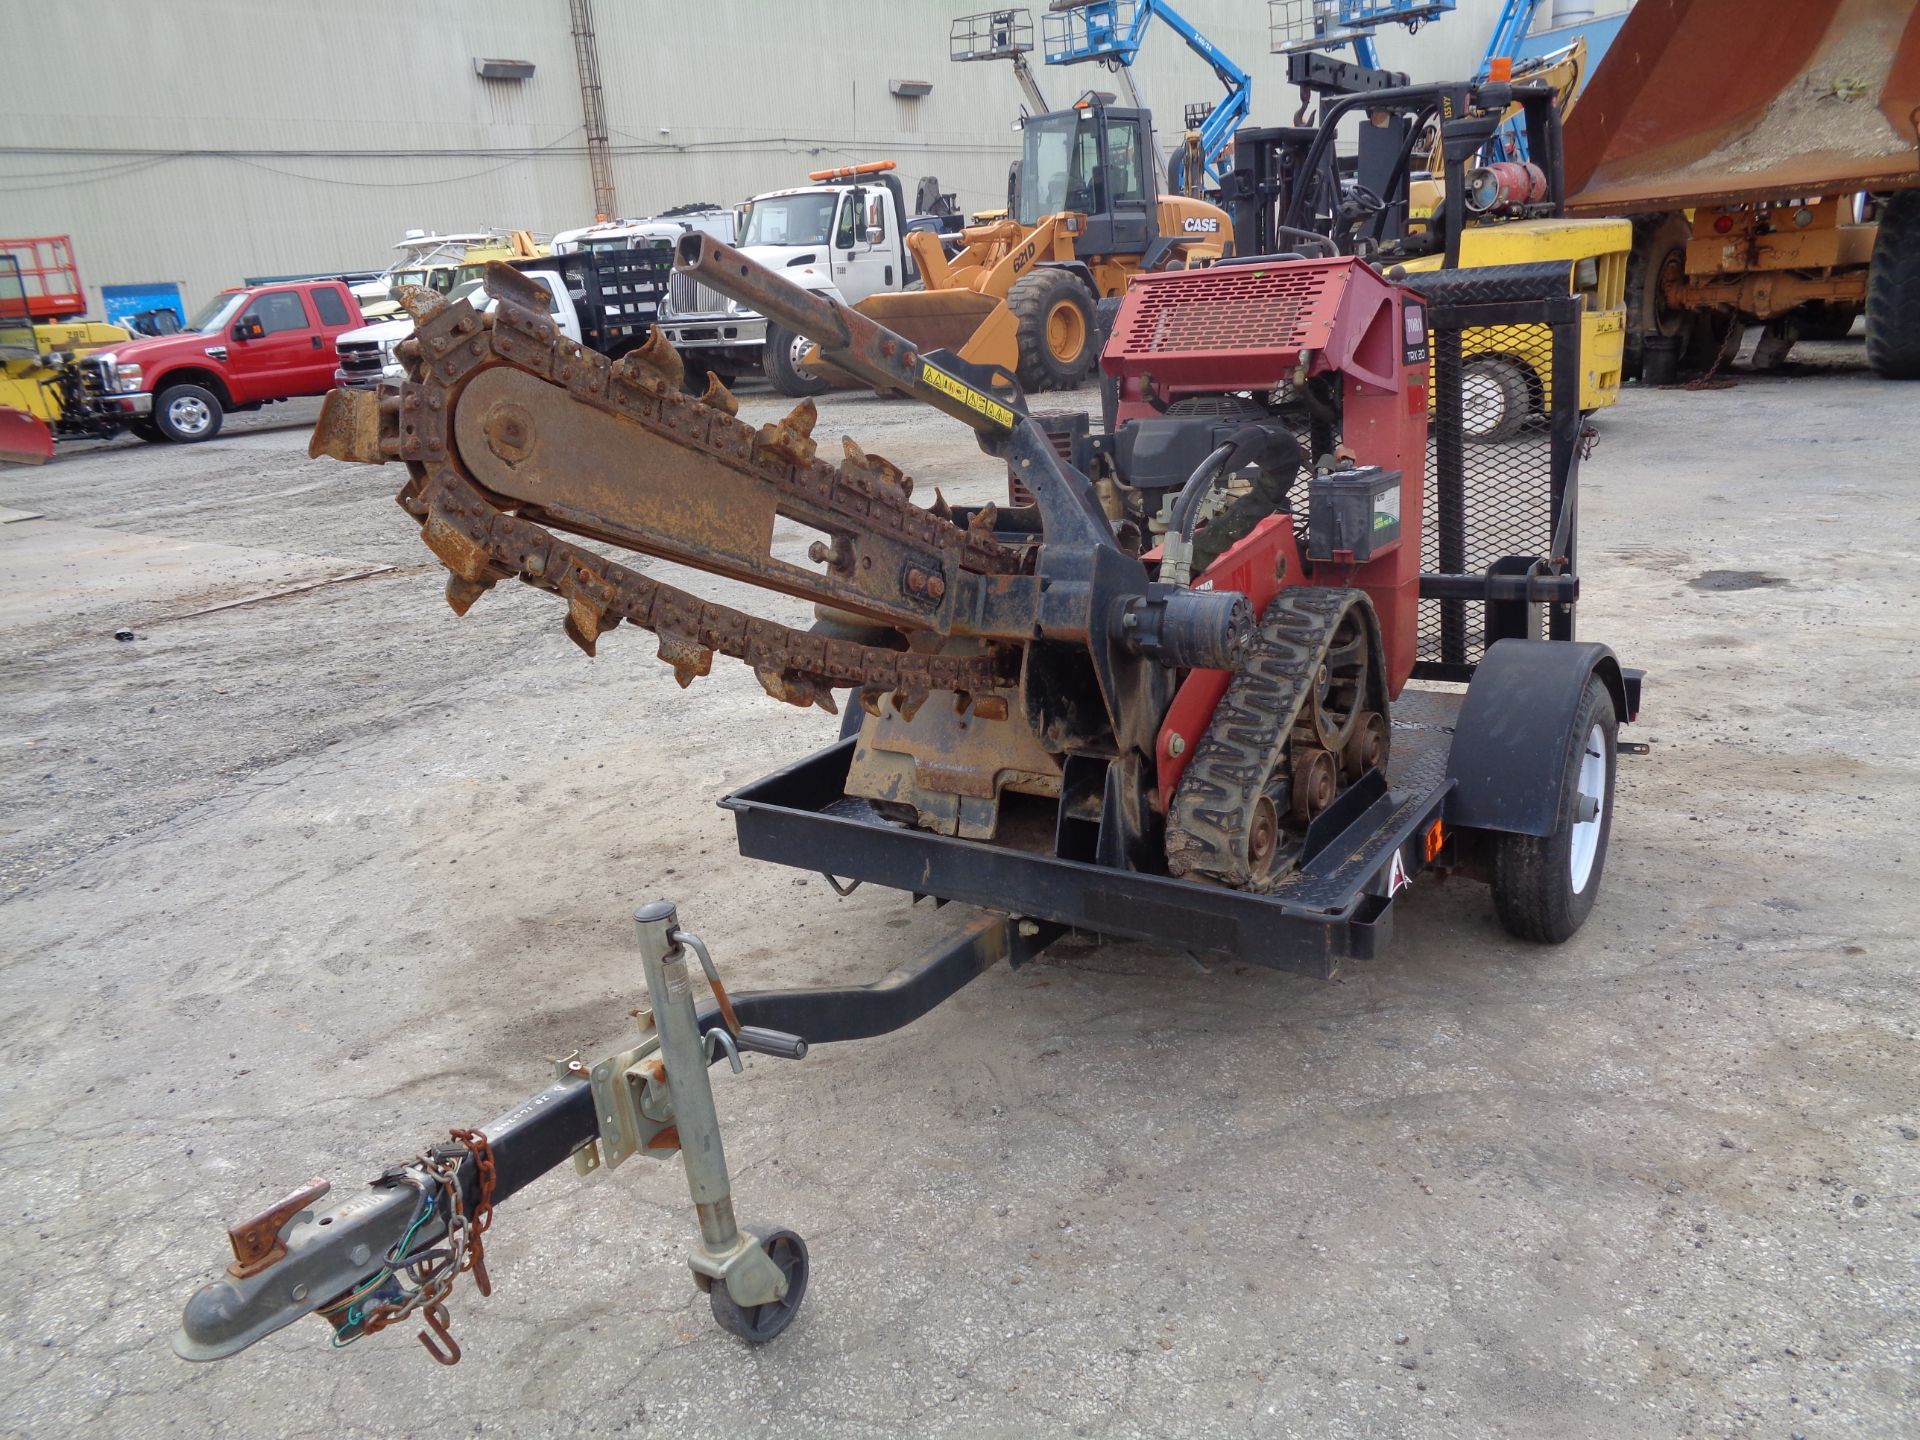 2014 Toro TRX20 Trencher with Trailer - Image 12 of 19